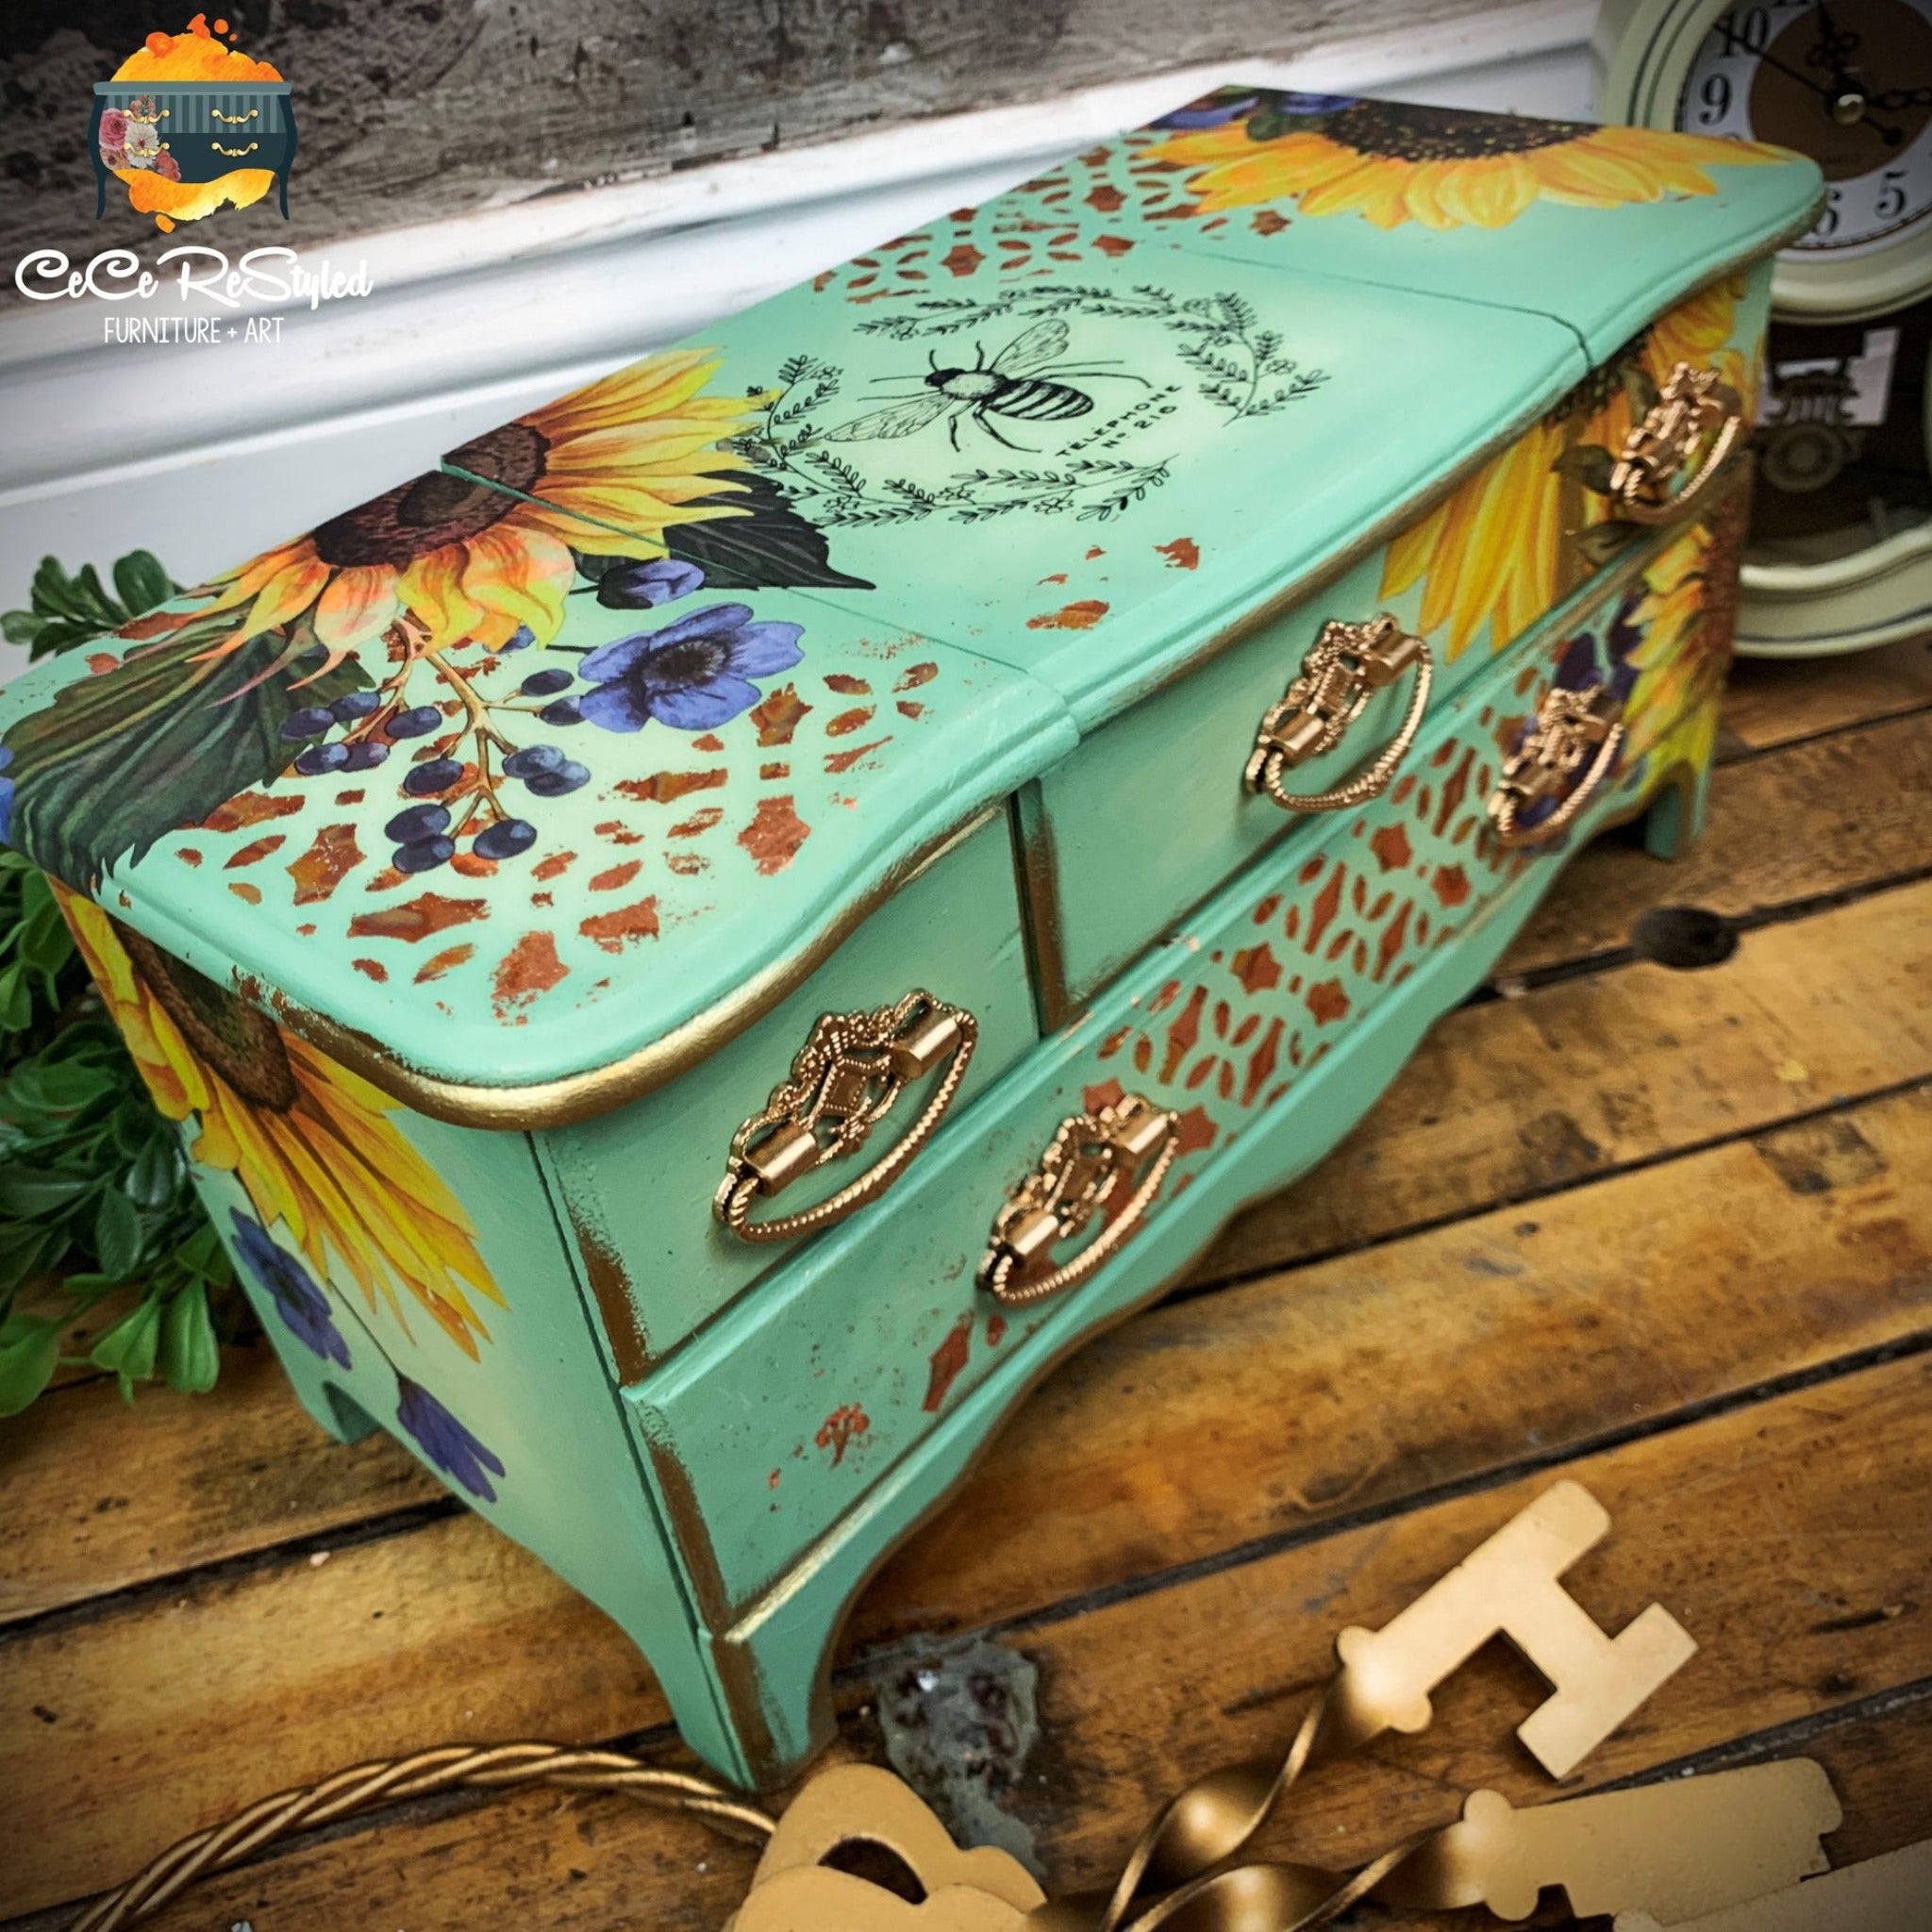 A vintage table top jewelry box refurbished by CeCe ReStyle is painted Spring green with gold accents and features ReDesign with Prima's Sunflower Fields on it.